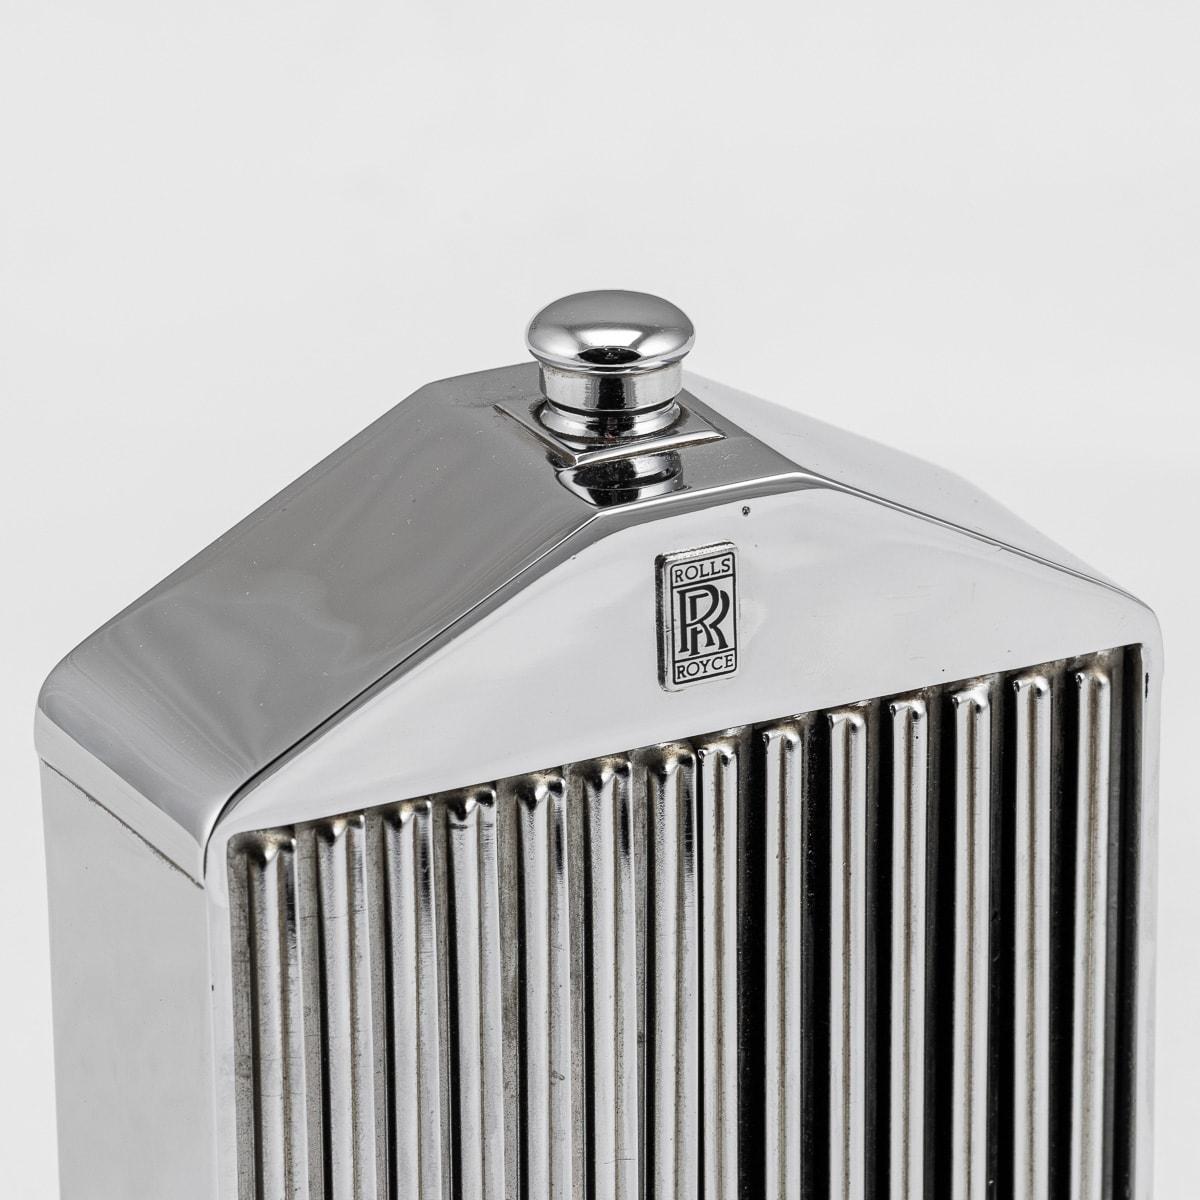 20th Century Stylish Ruddspeed Rolls Royce Radiator Flask / Decanter c.1960 In Excellent Condition For Sale In Royal Tunbridge Wells, Kent